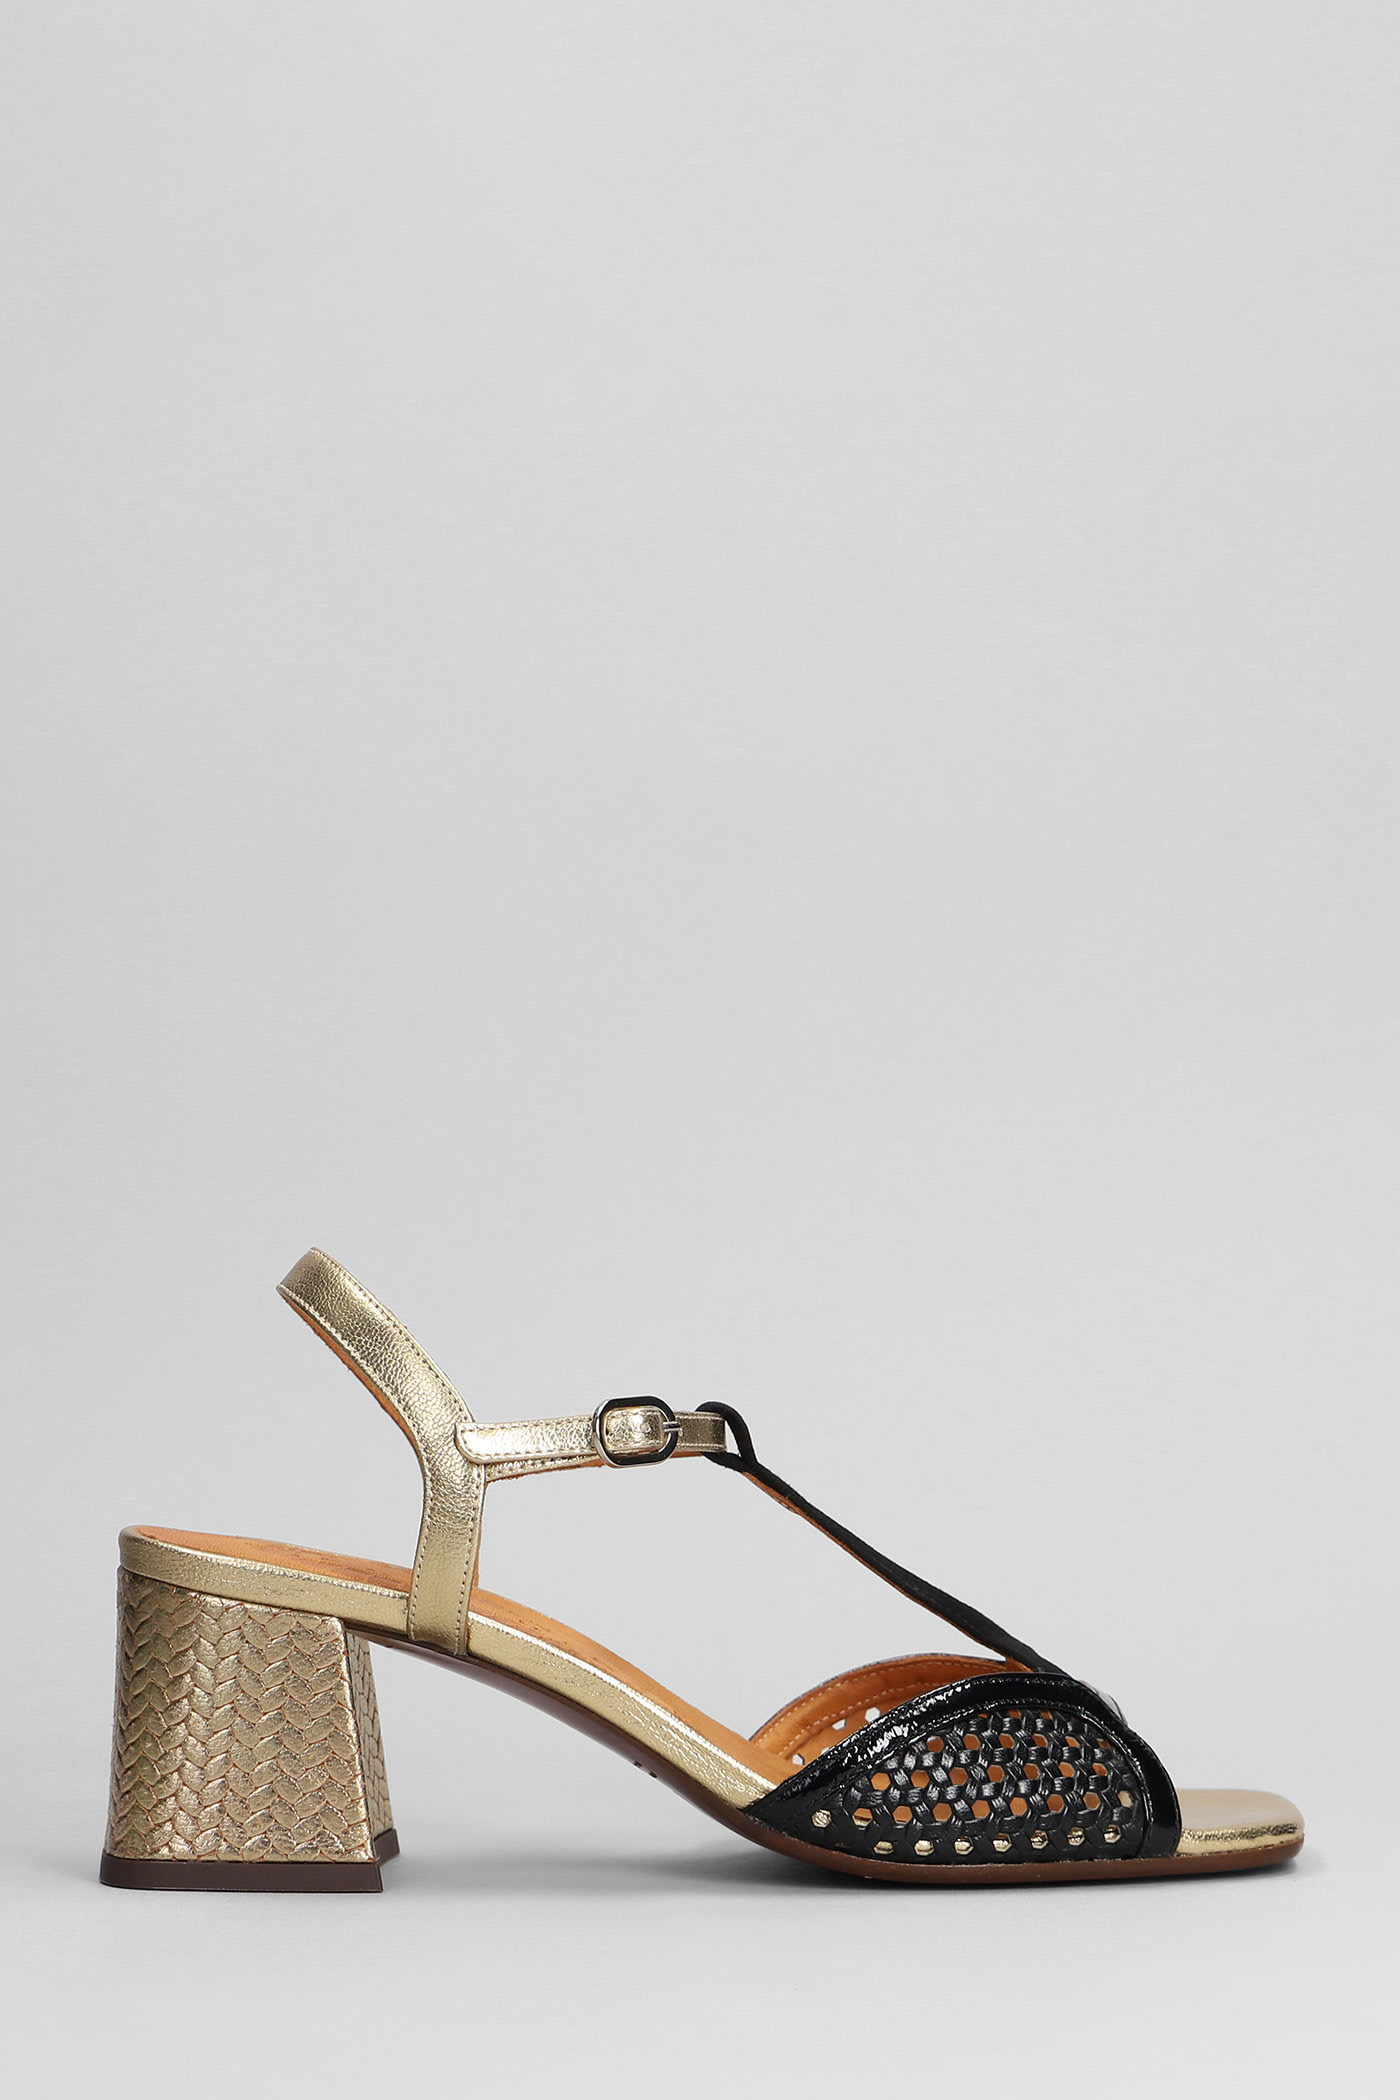 CHIE MIHARA LIPICO SANDALS IN BLACK LEATHER